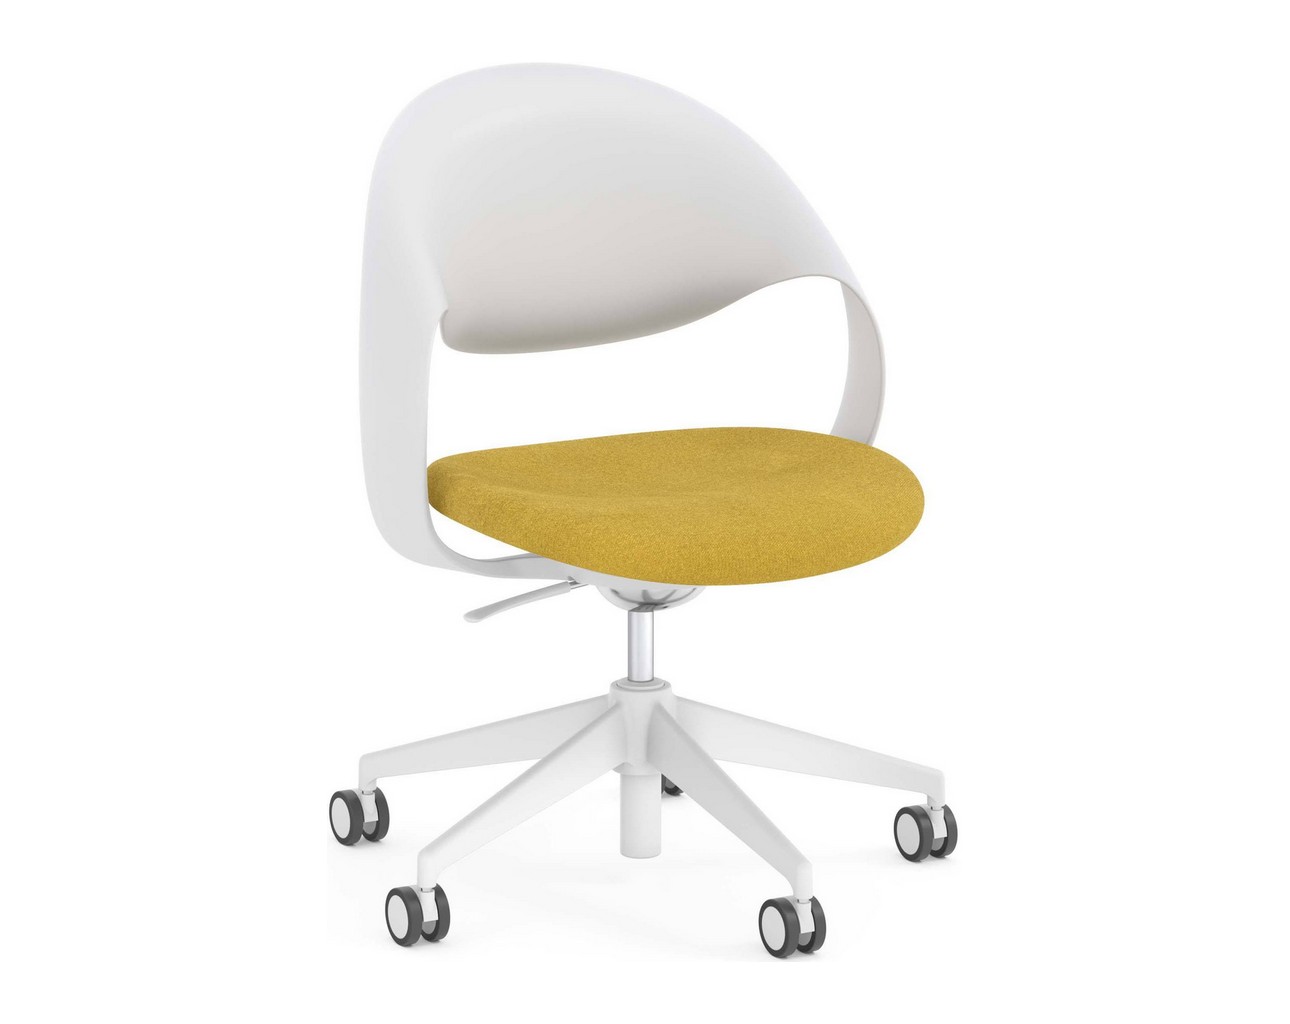 Loop Multi-Purpose Chair – White Frame with Mustard Seat